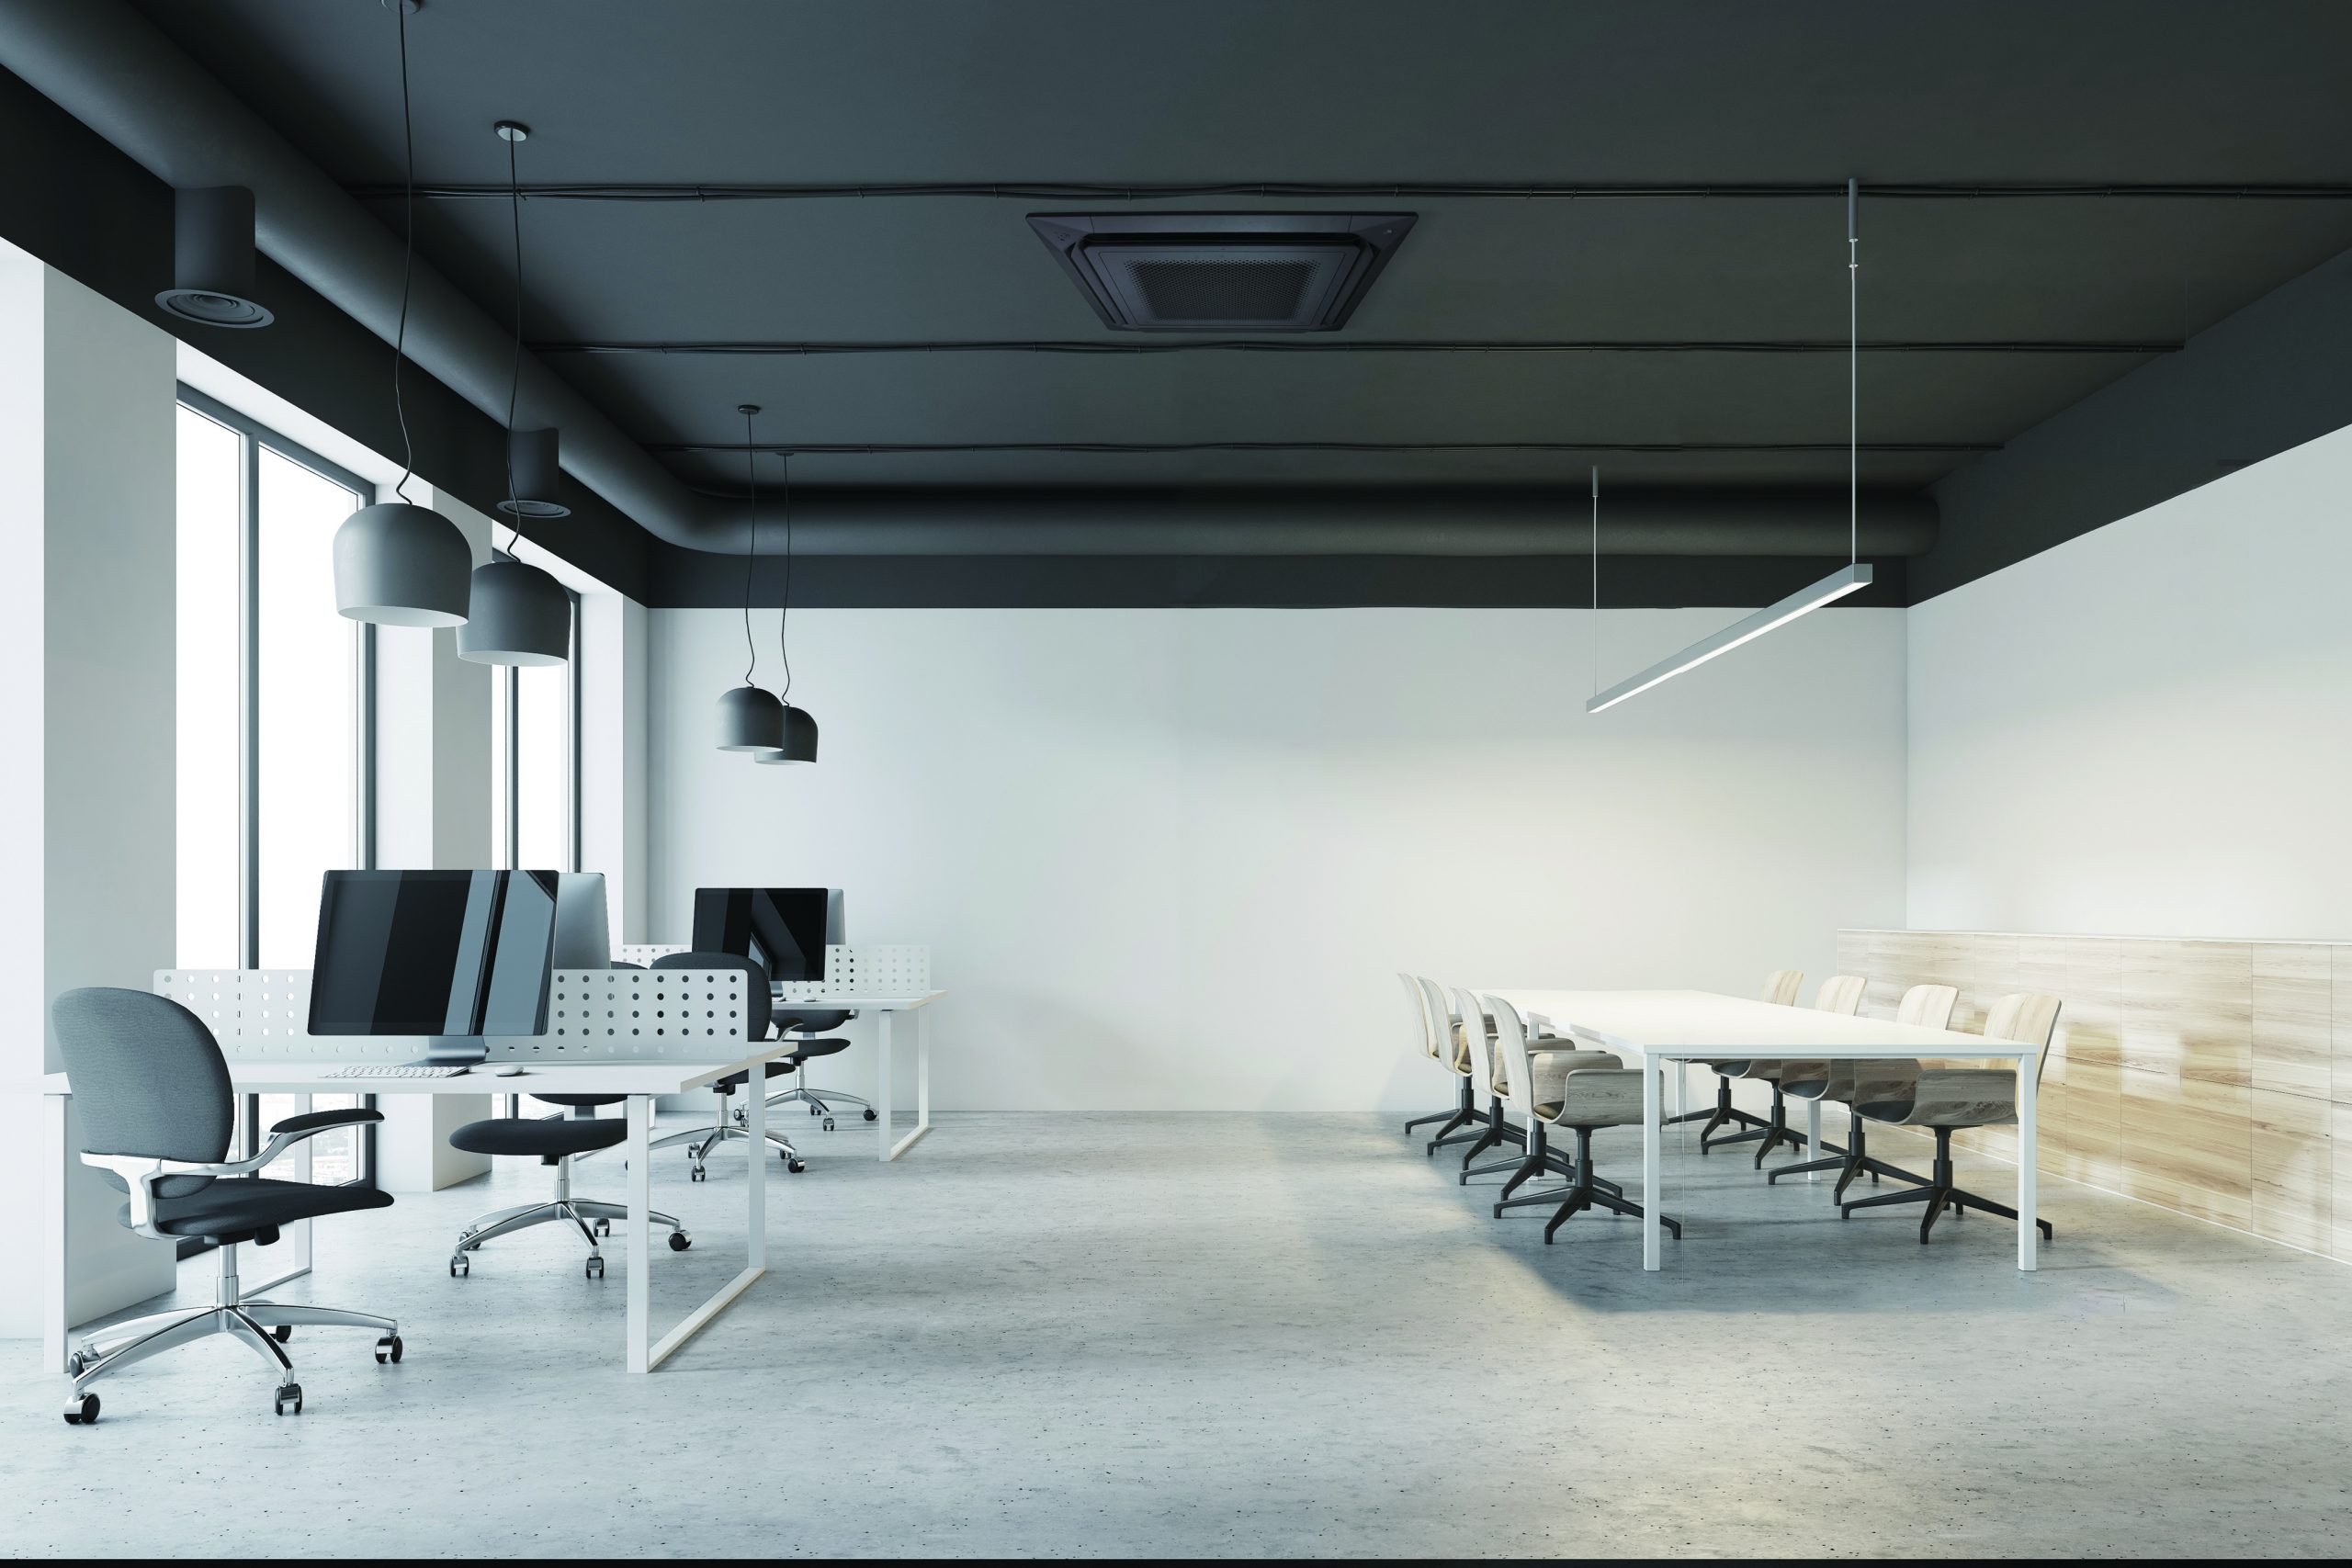 White meeting room interior with a glass wall and a long table with beige chairs. An open space office to the left. 3d rendering mock up